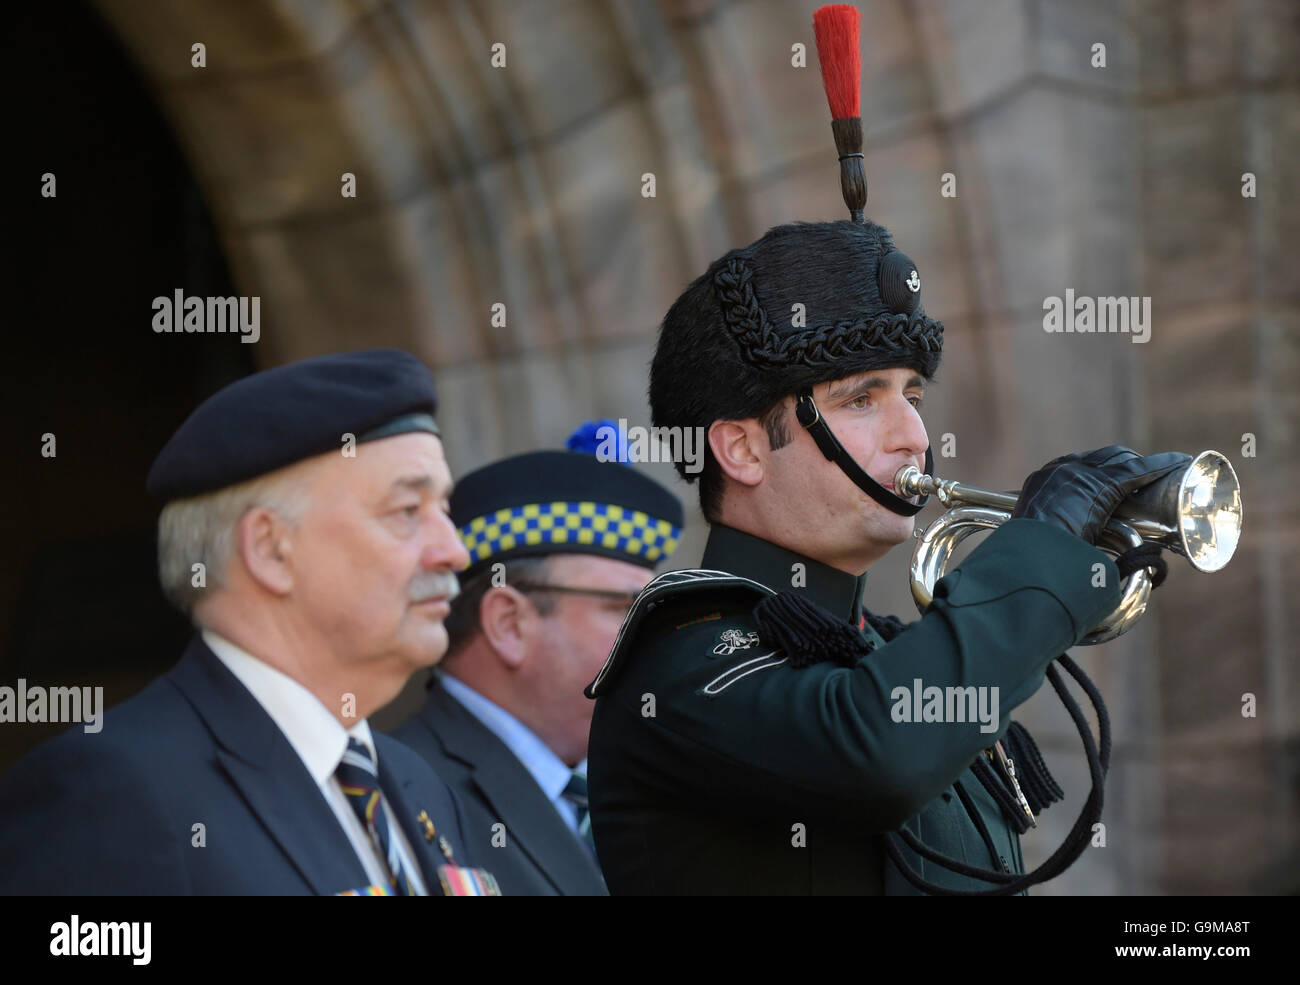 A bugle is played during a special service which followed an overnight vigil, at Edinburgh Castle, as Scotland marks the 100th anniversary of the Battle of the Somme. Stock Photo